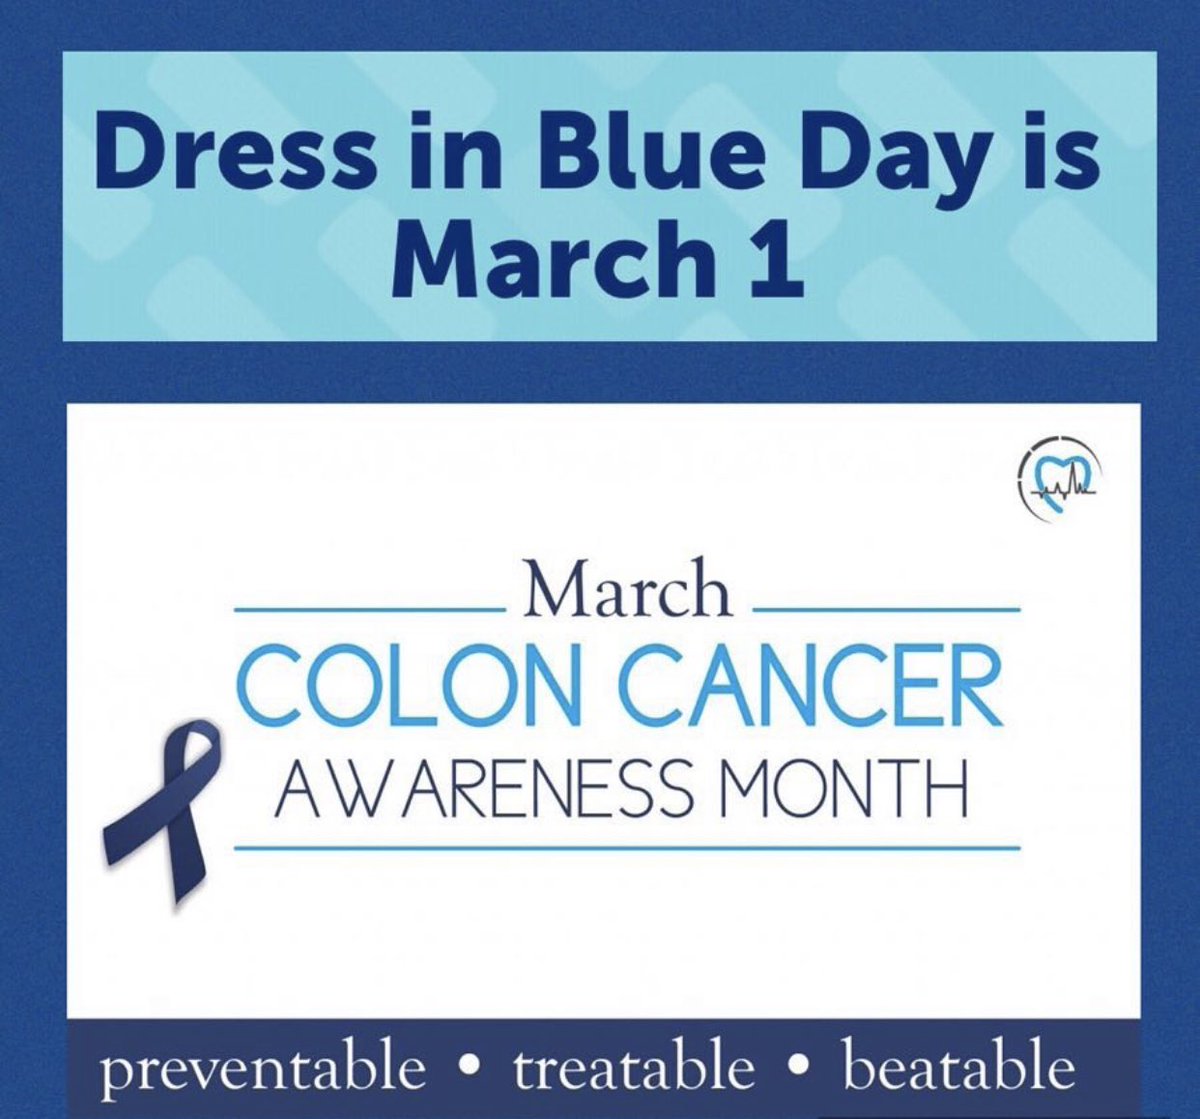 💙March is CRC Awareness Month Dress in 👕 March 1st for CRC awareness 💙Colorectal cancer diagnosis in adults ages 40 to 49 , nearly ⬆️ by 15% btw 2000-2002 & 2014-2016. 💙Screening tests starts age 45 in avg risk patients #cologuard #fittest #colonoscopy #gitwitter